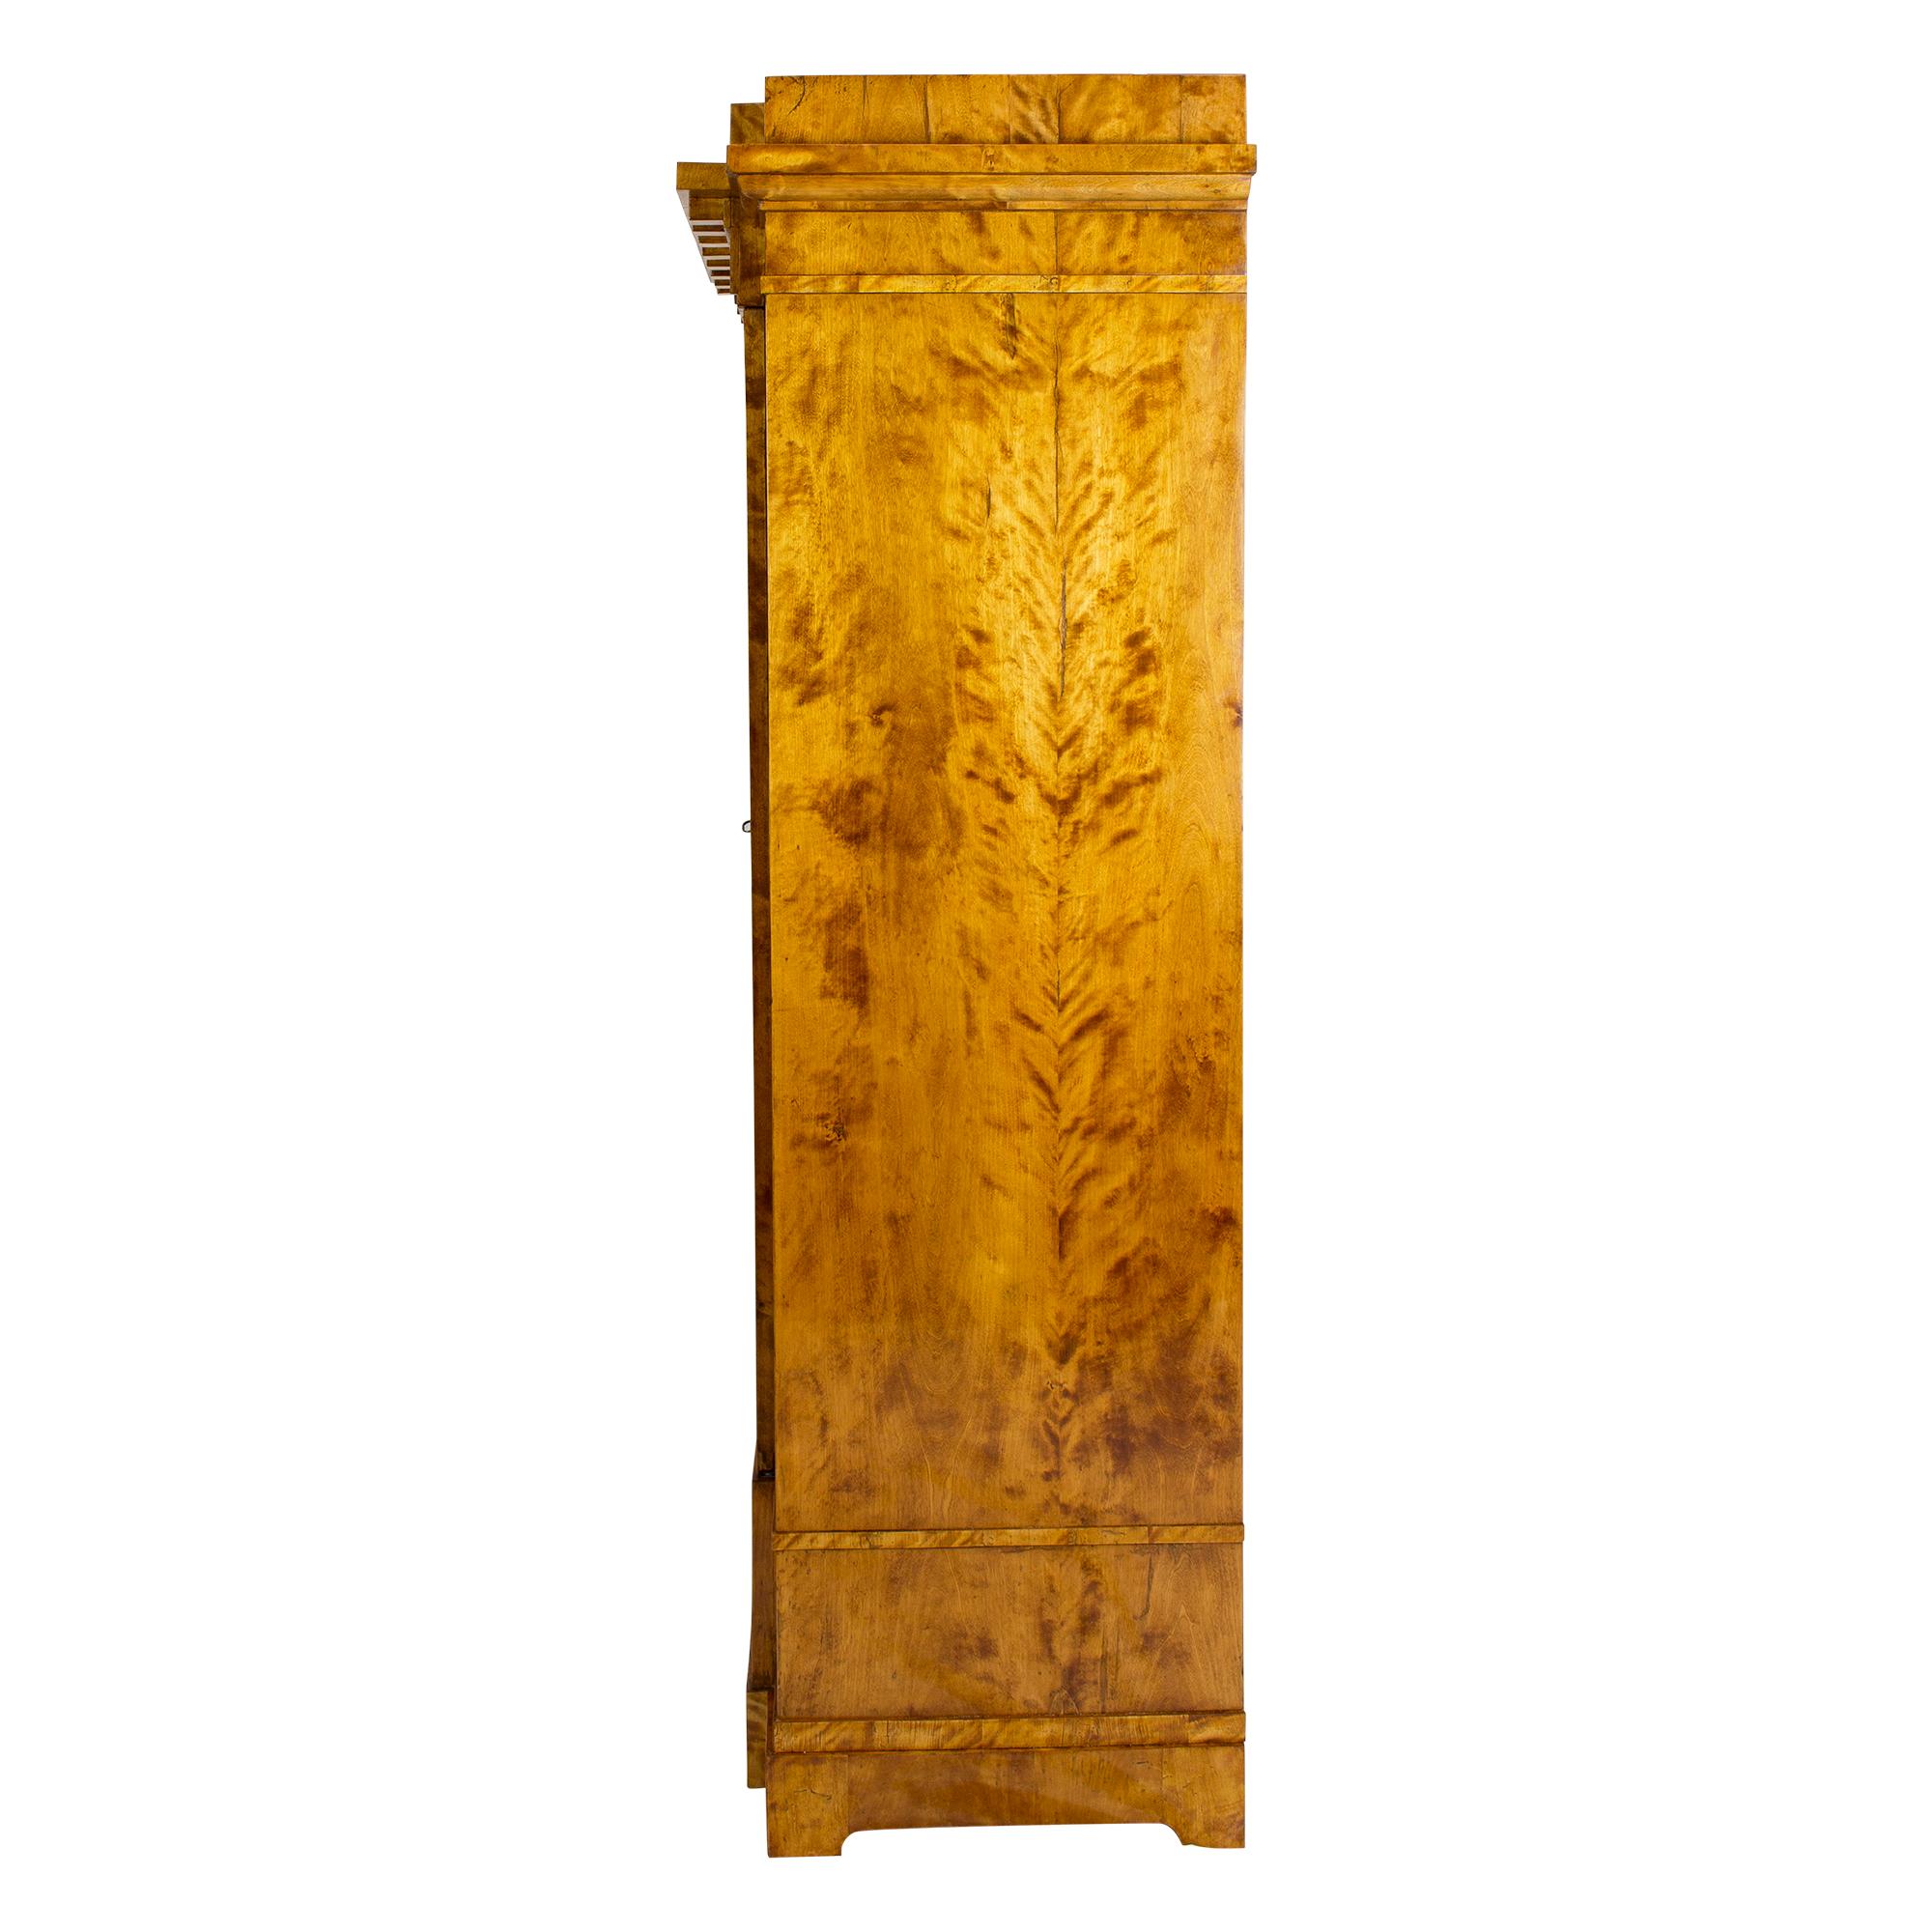 Polished Early 19th Century One-Door Biedermeier Flamed Birch Armoire / Cabinet For Sale